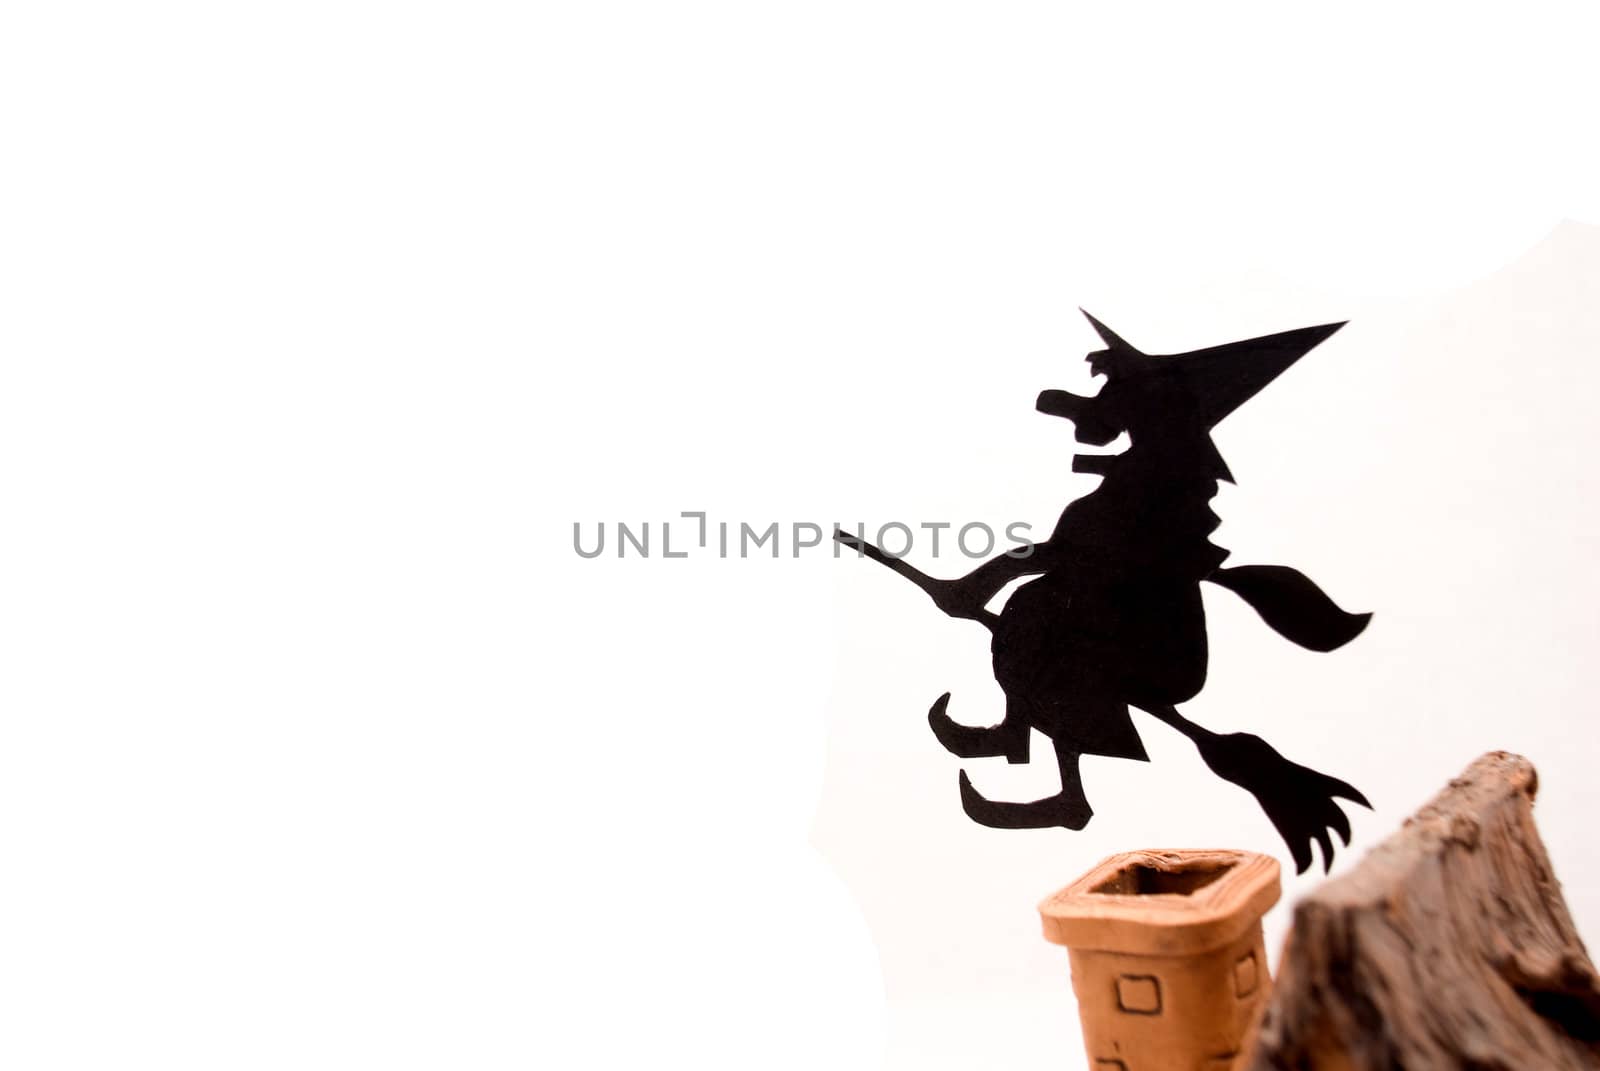 Witch,flying on broom on house,on white background
